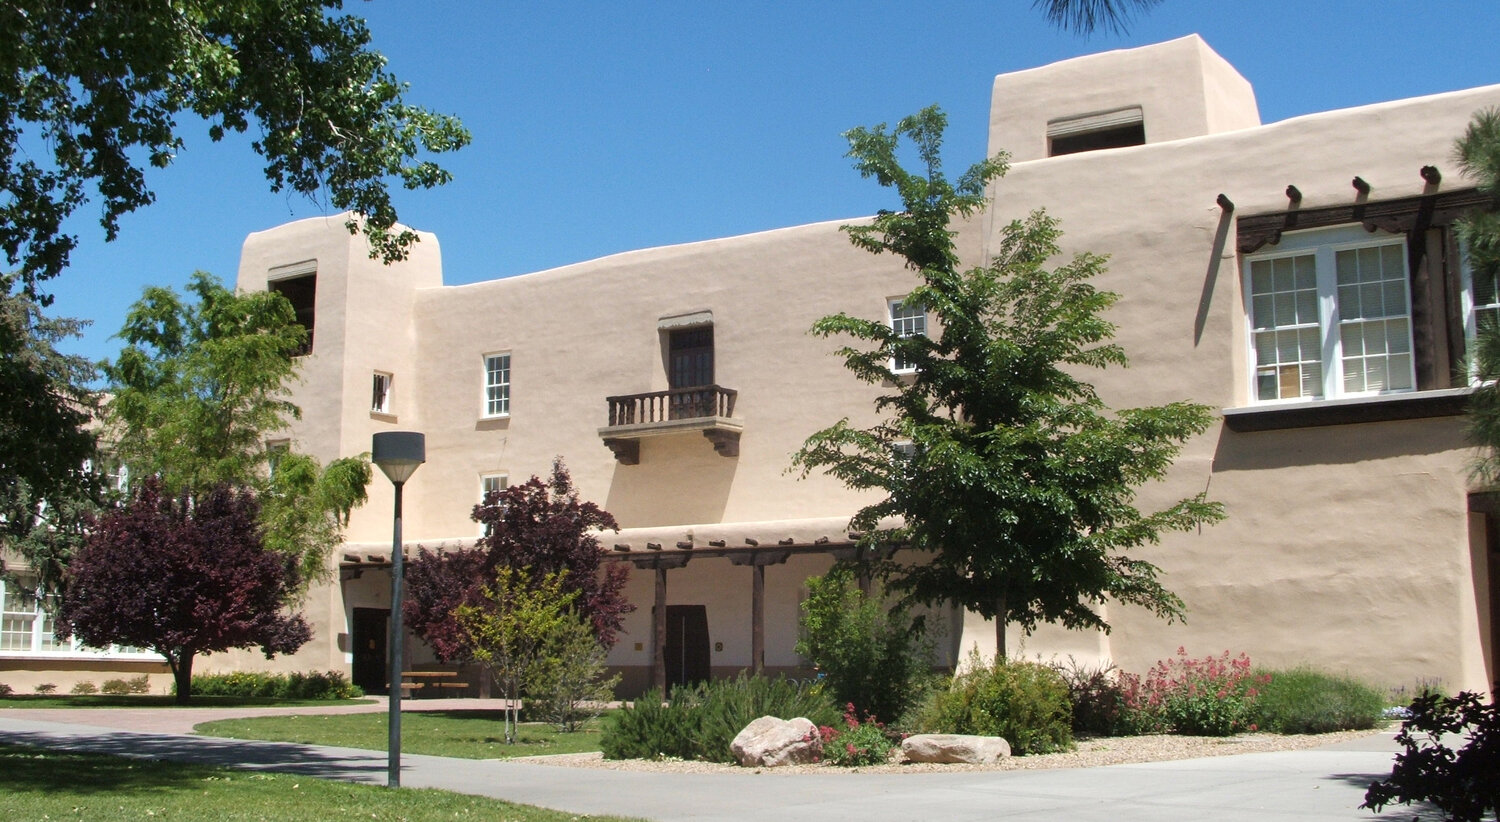 Scholes Hall at UNM's main campus designed by John Gaw Meem.